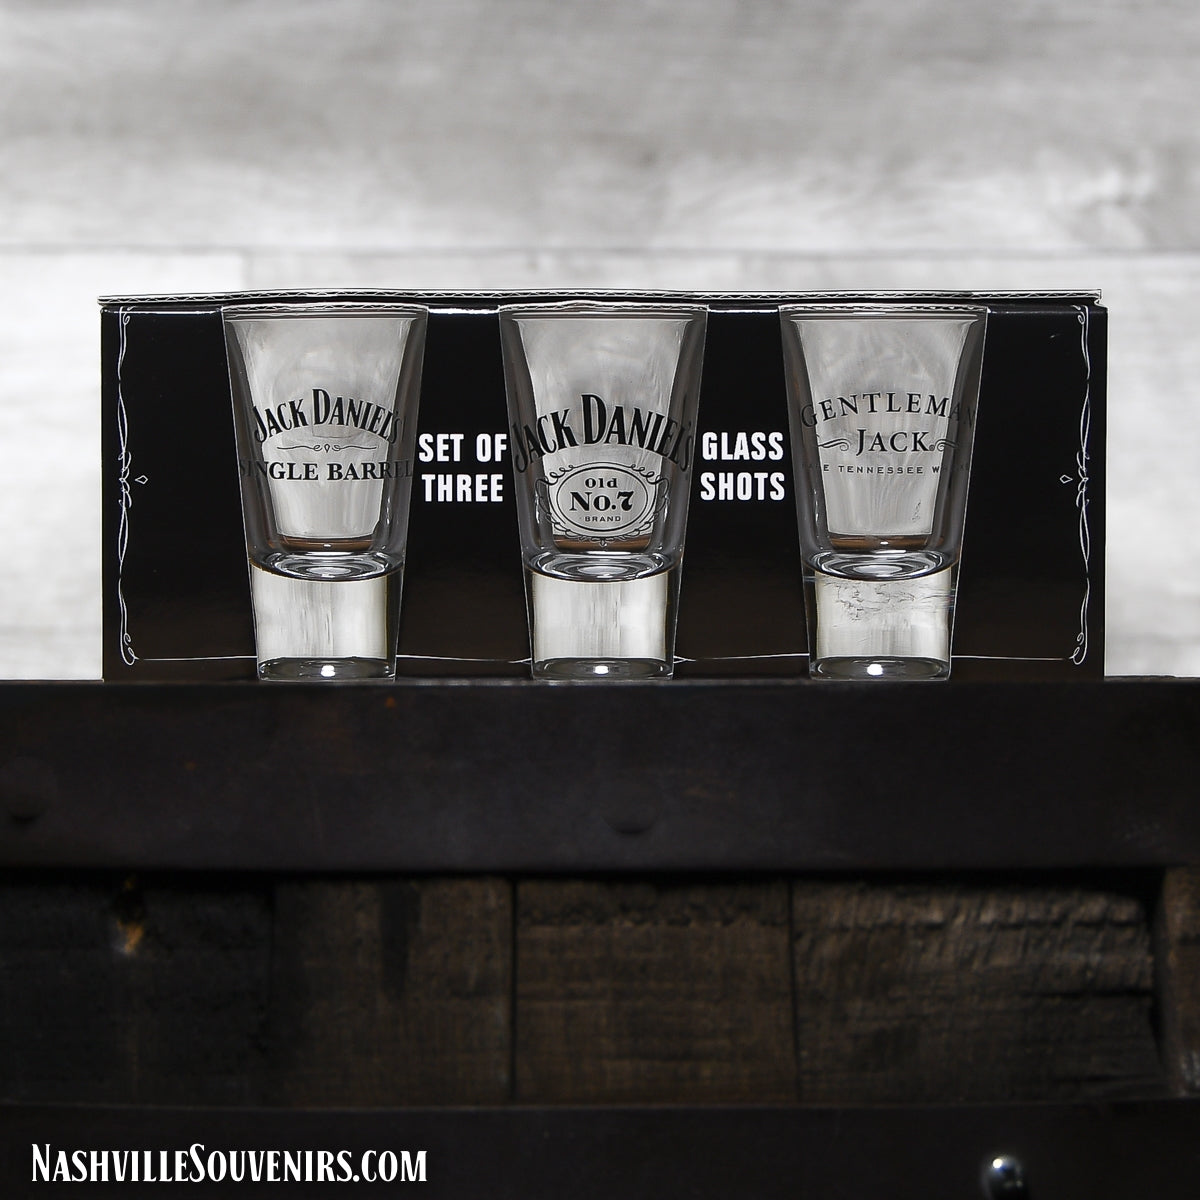 Shoot with Style! Great licensed Jack Daniels Gift Set with Glasses. Get yours today with FREE SHIPPING on all US orders over $75! There different Jack Daniel's logos featured in this JD giftset.